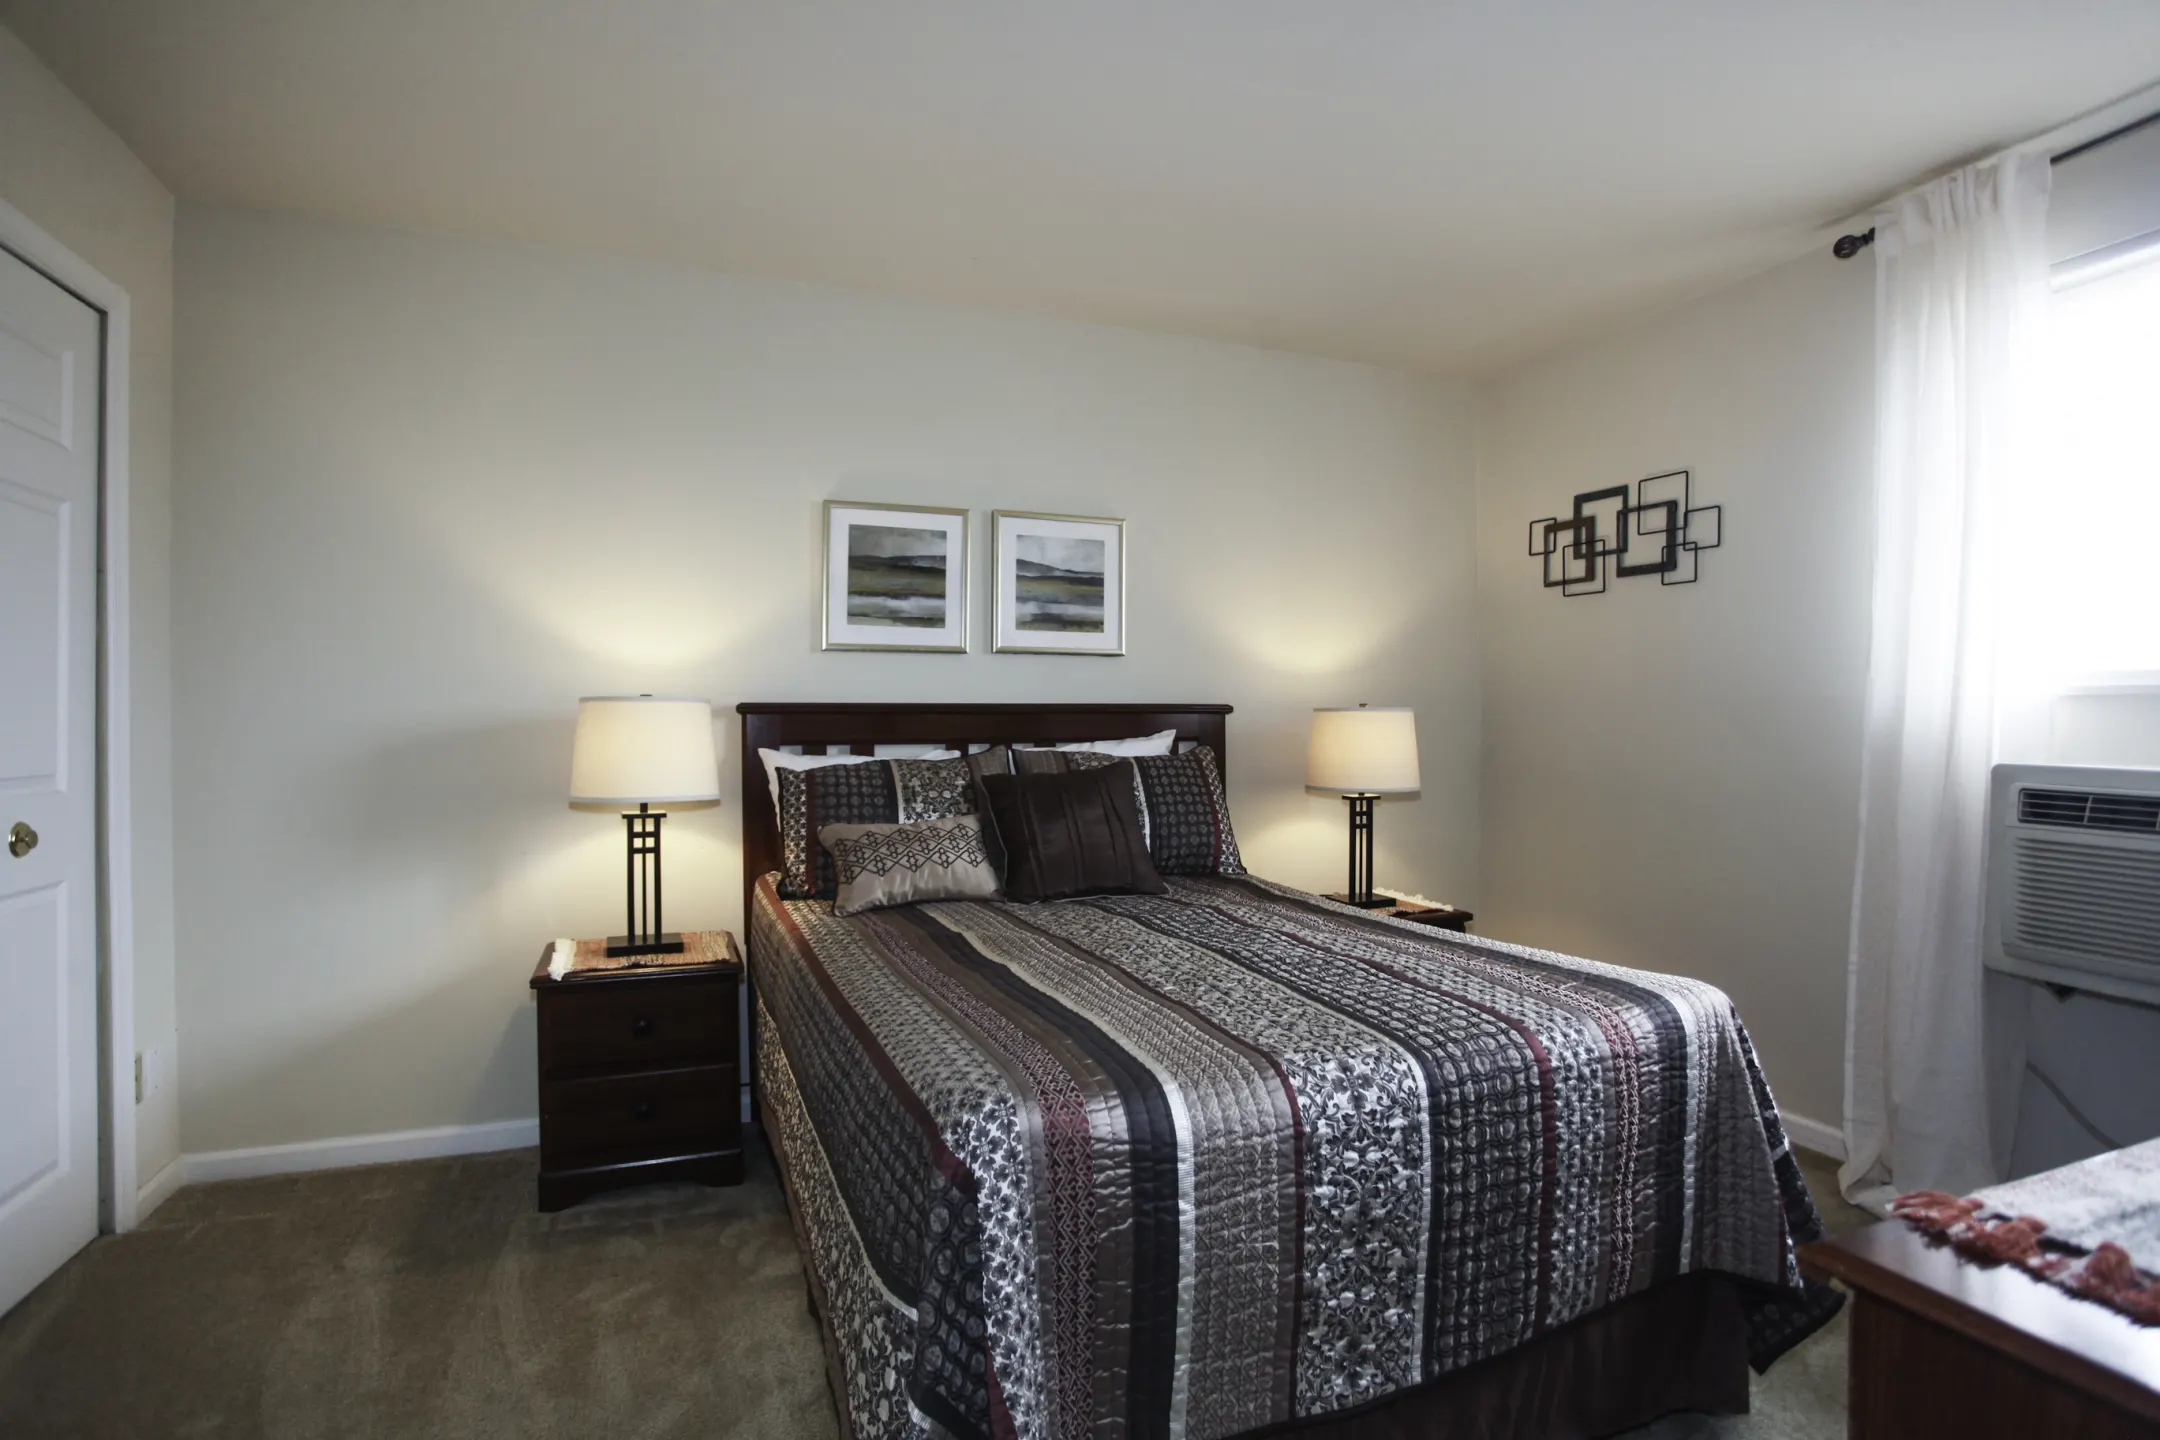 Bedroom - Parkside Gardens Apartments & Townhouses - Baltimore, MD